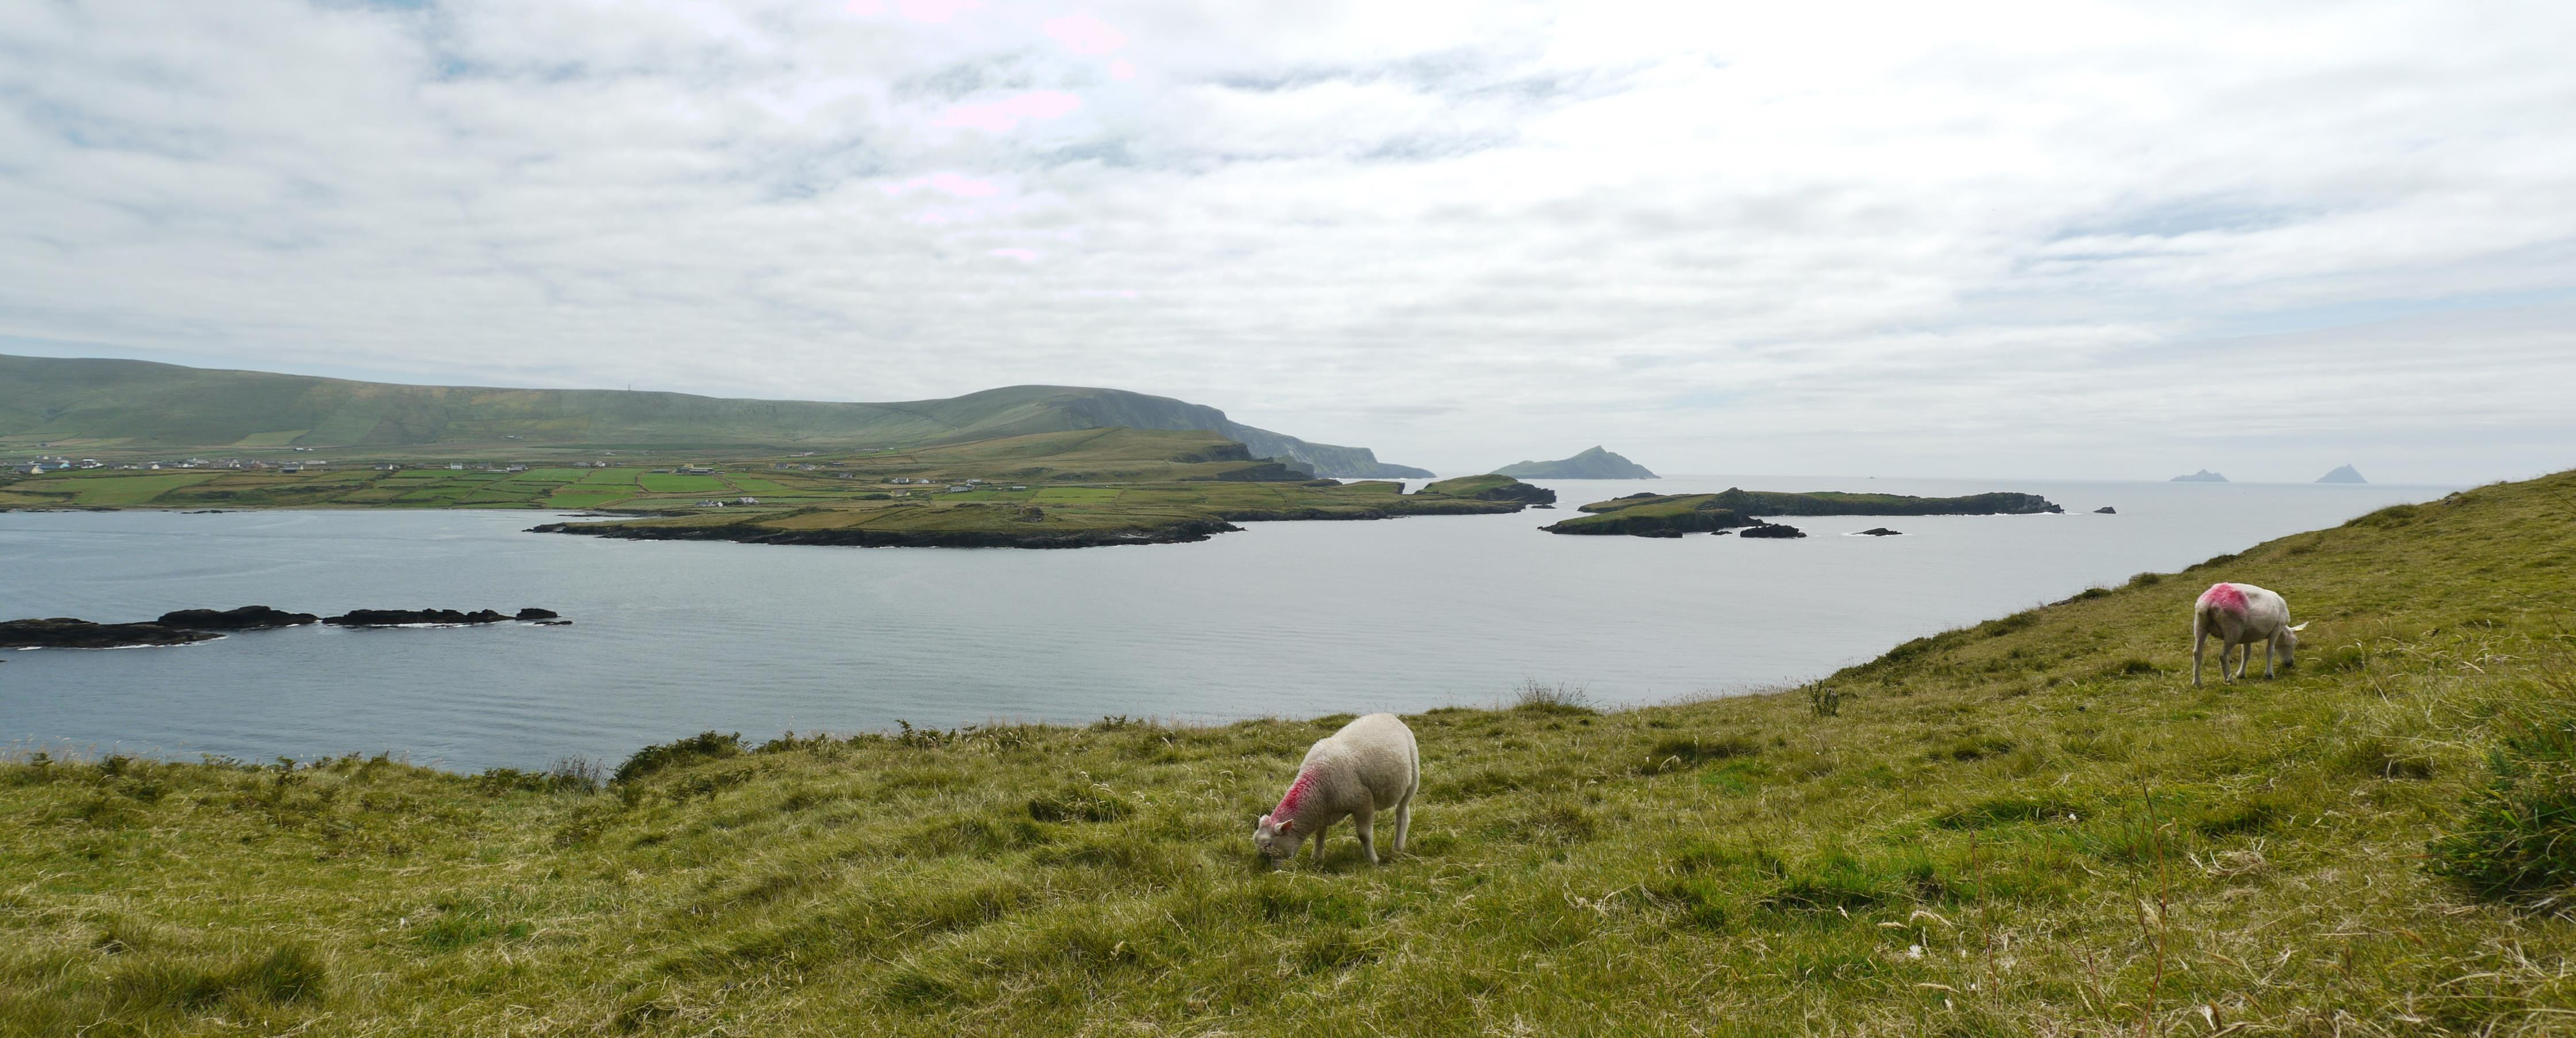 Sheep in County Kerry (Skellig Michael to the right)